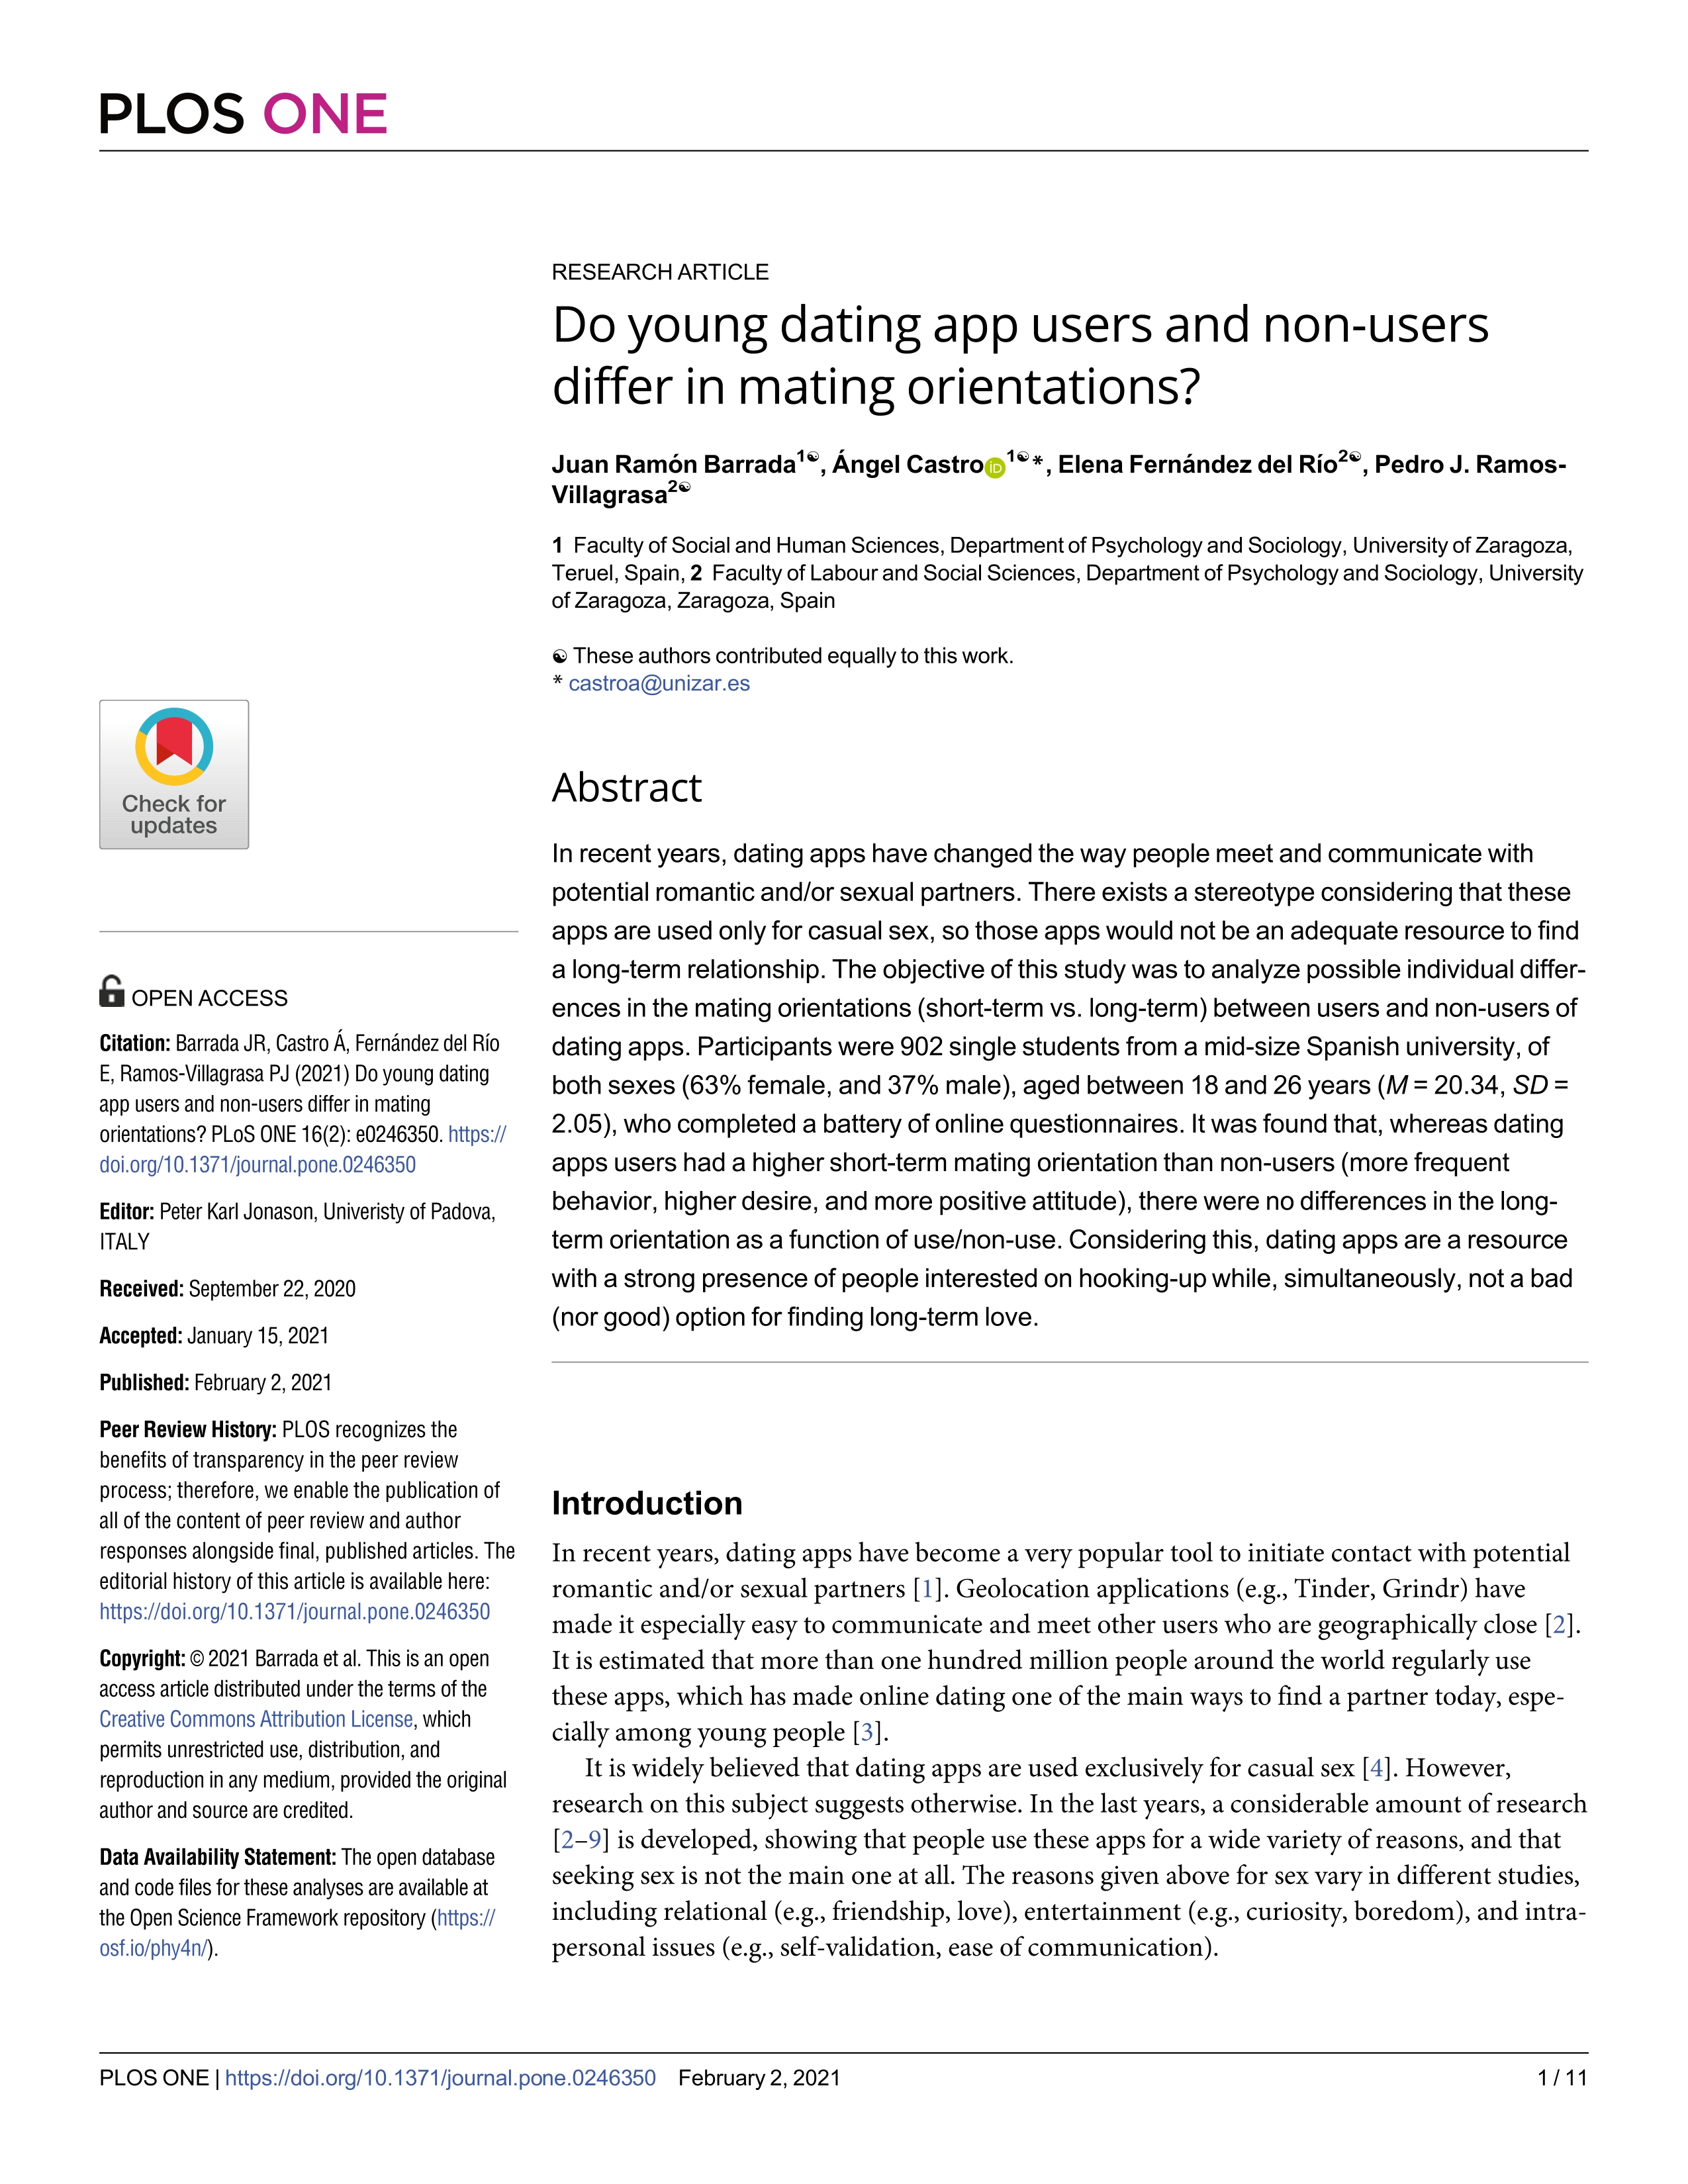 Do Young Dating App Users And Non Users Differ In Mating Orientations